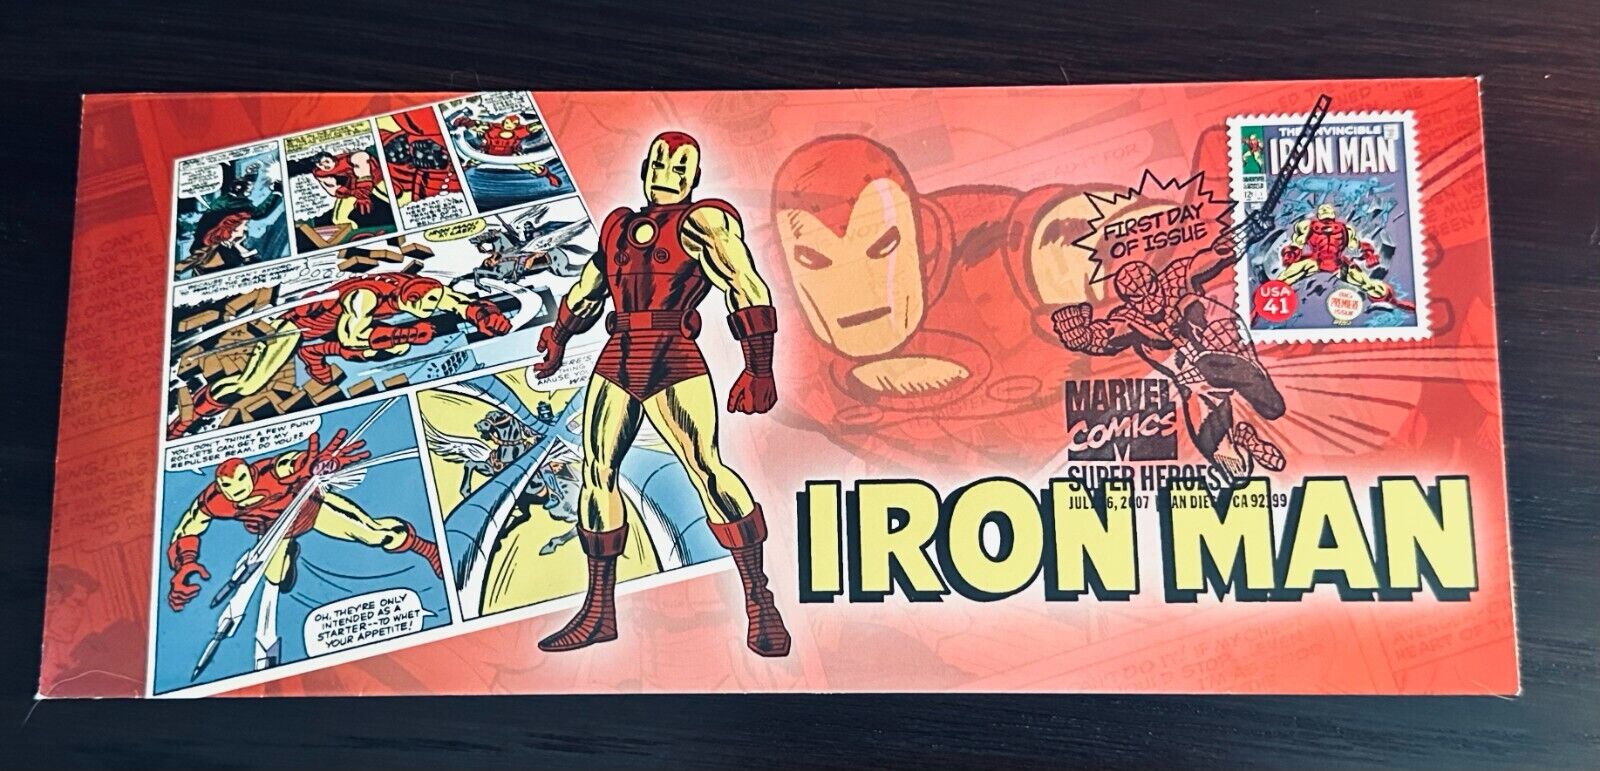 IRON MAN USPS 1st Day of Issue Marvel Superheroes San Diego 2007 Envelope